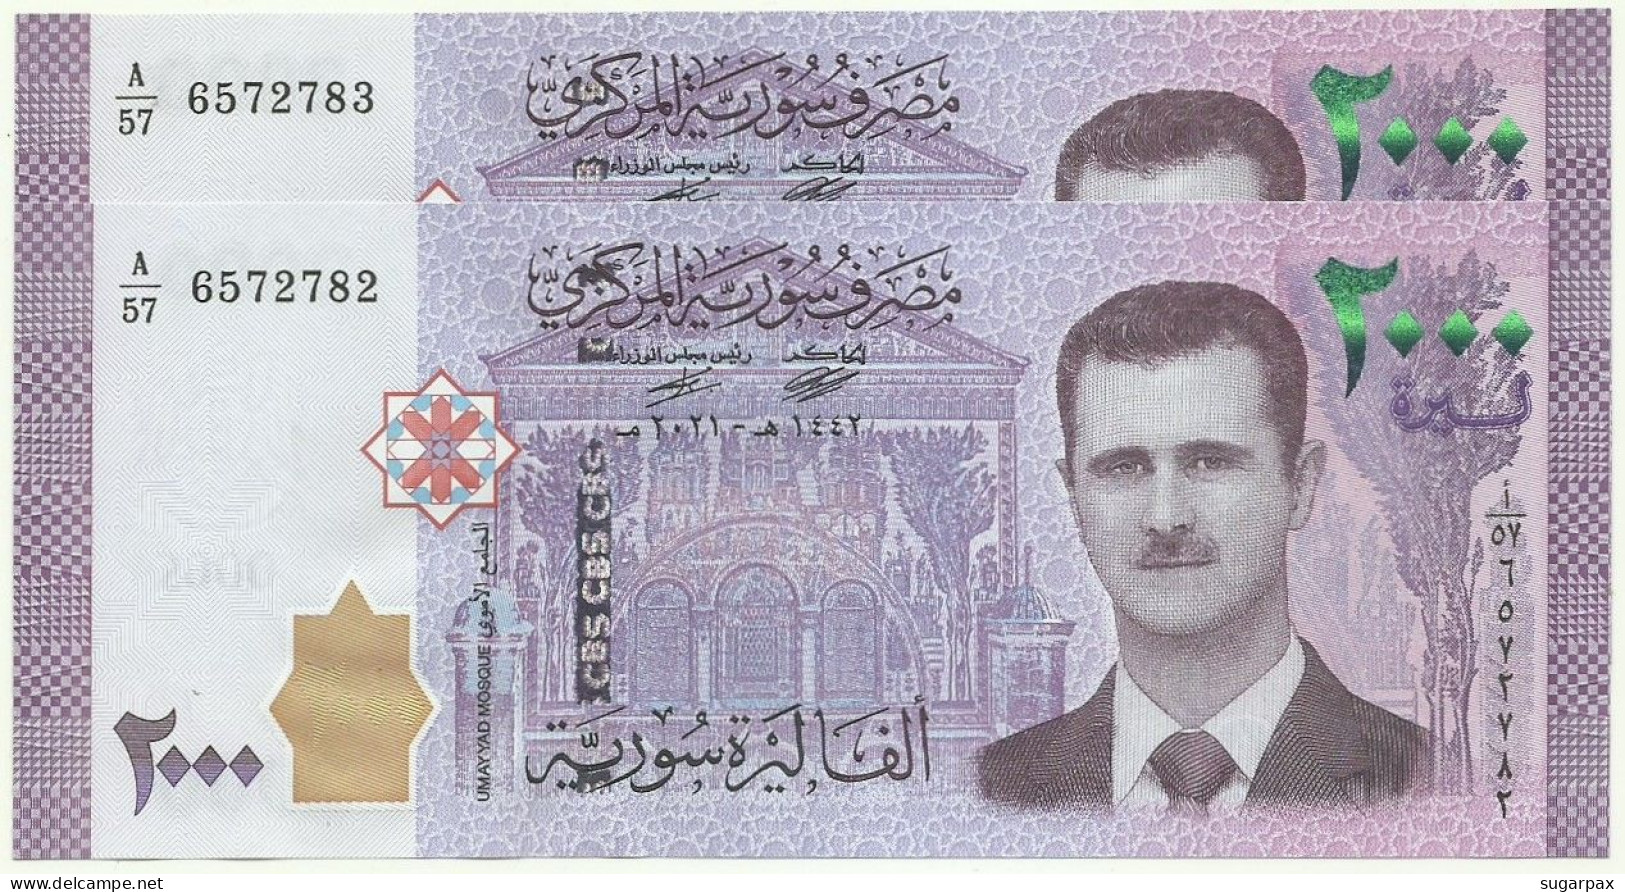 Syria - 2 X 2000 Syrian Pounds - 2021 / AH 1442 - Pick 117.NEW - Unc. - Serie A/57 - 2.000 - Syrie